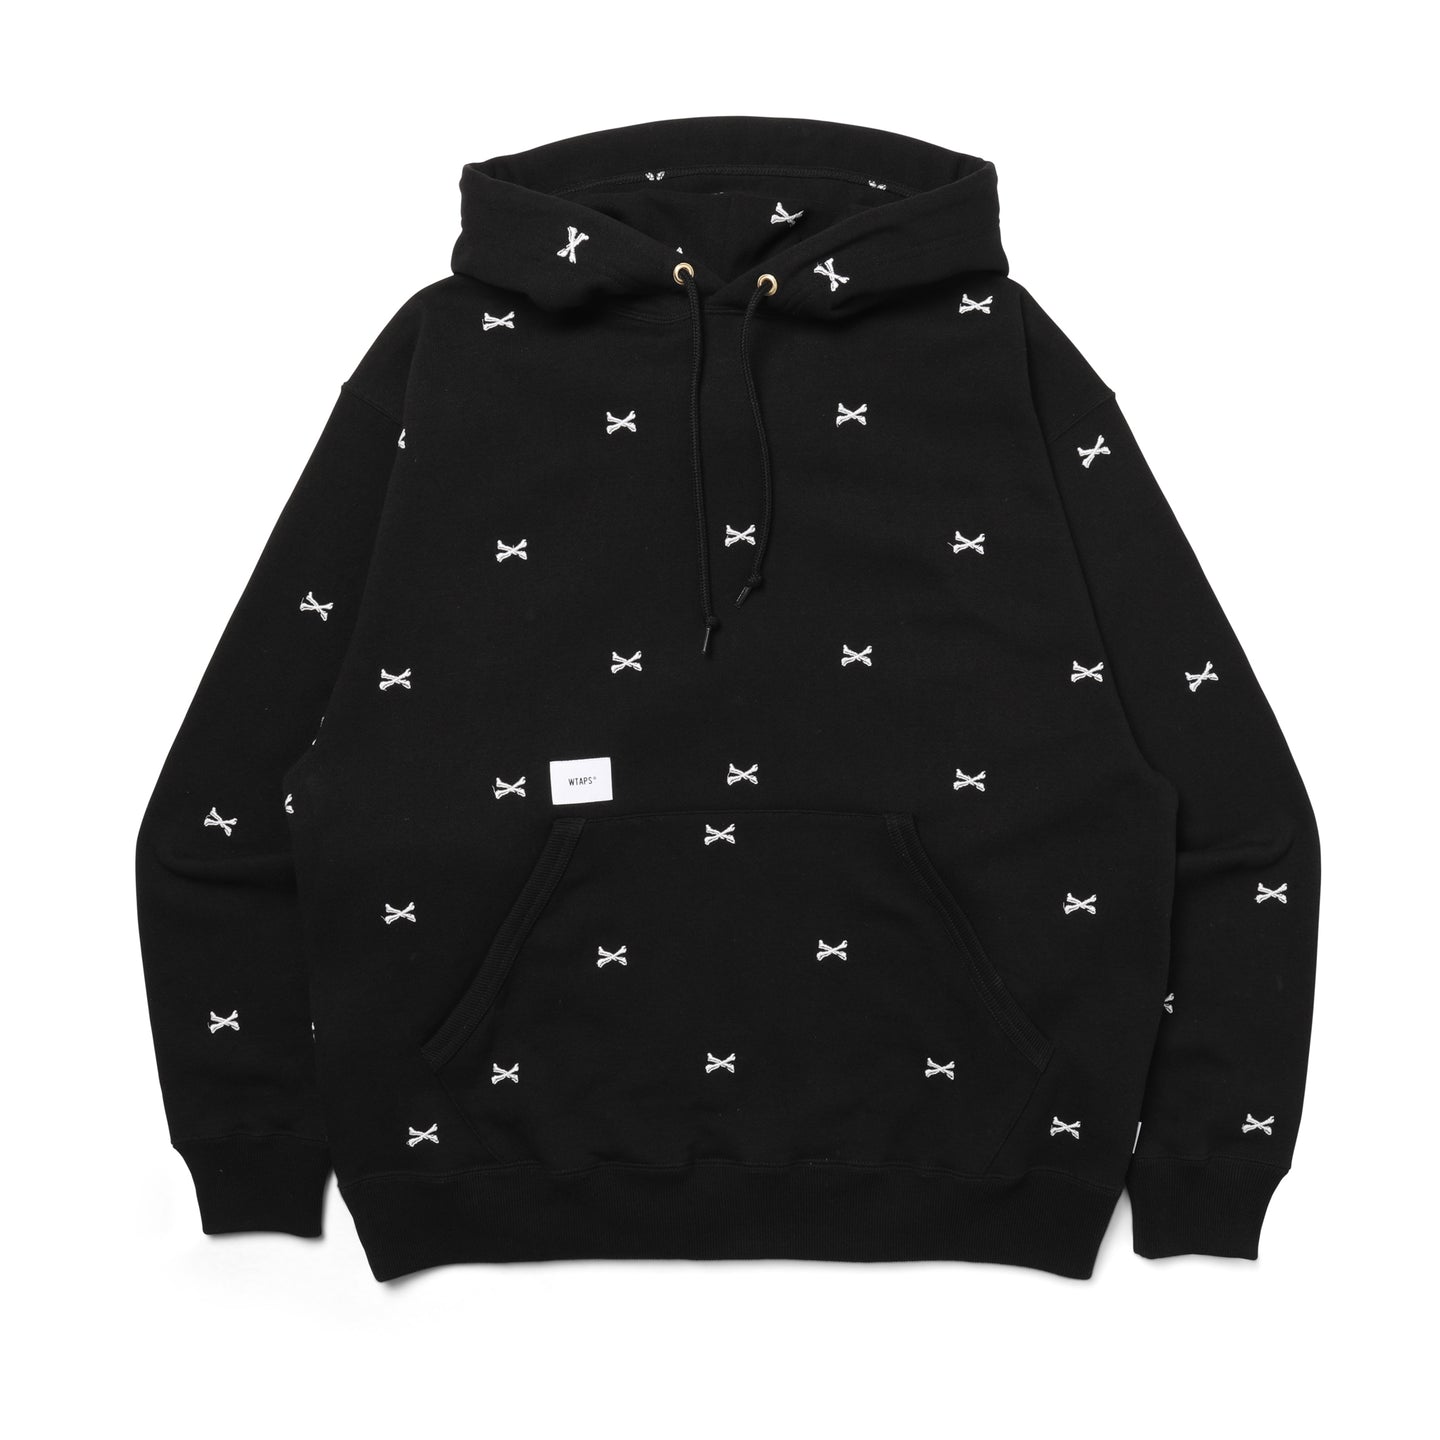 WTAPS ACNE Hooded Sweater Black